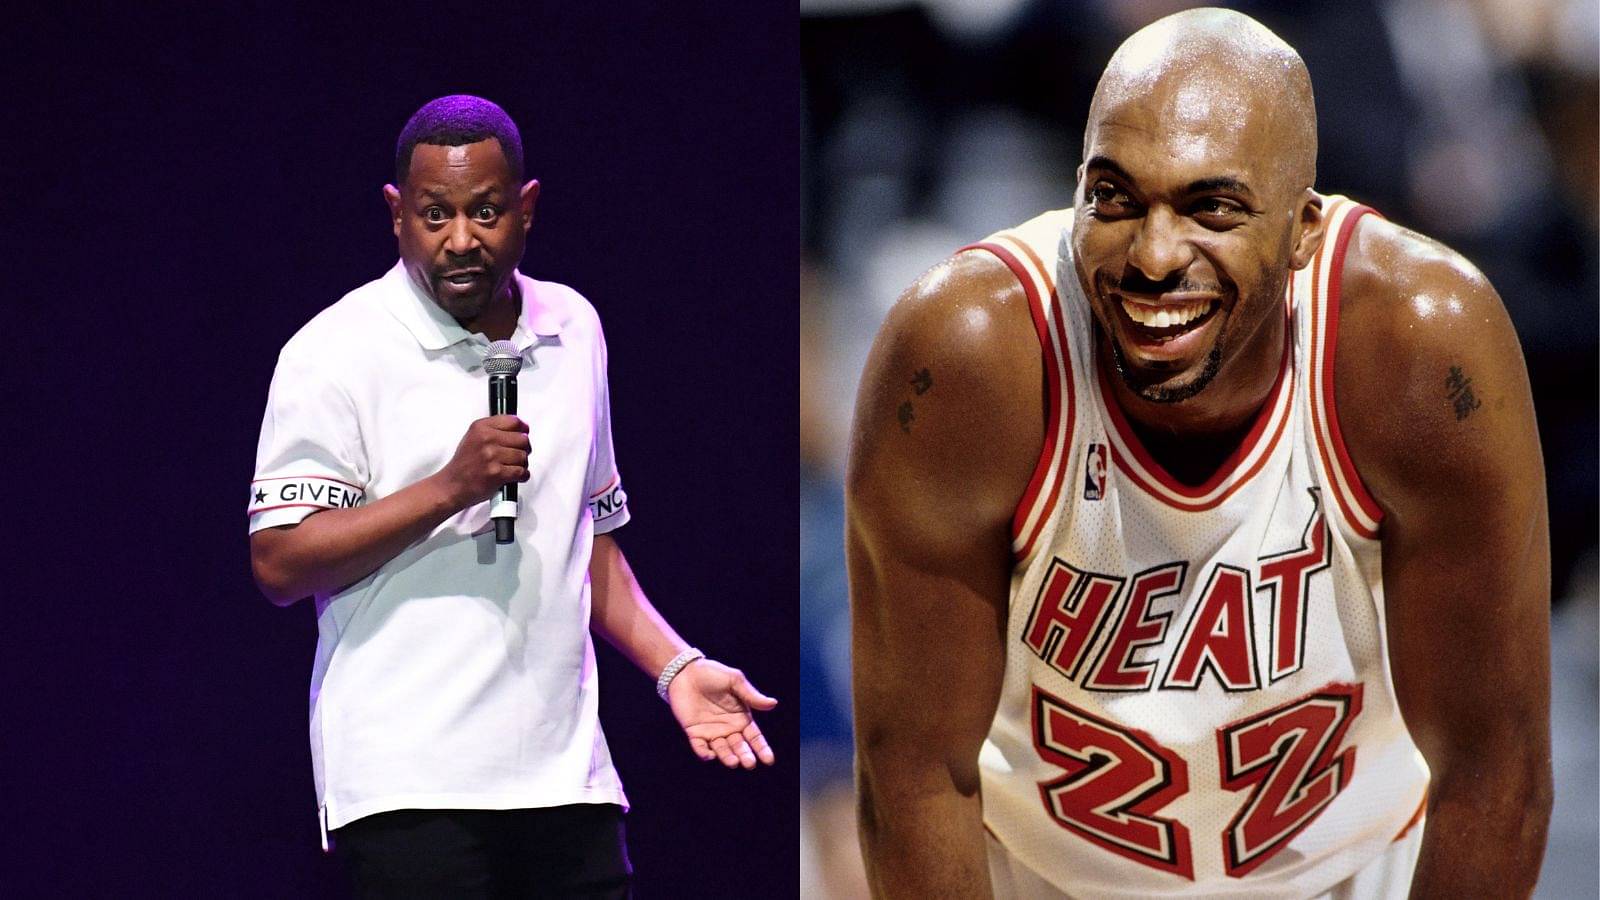 John Salley Once Pissed Off $100M Martin Lawrence by Asking him “You Got a Prenup?” in Front of His Fiancee